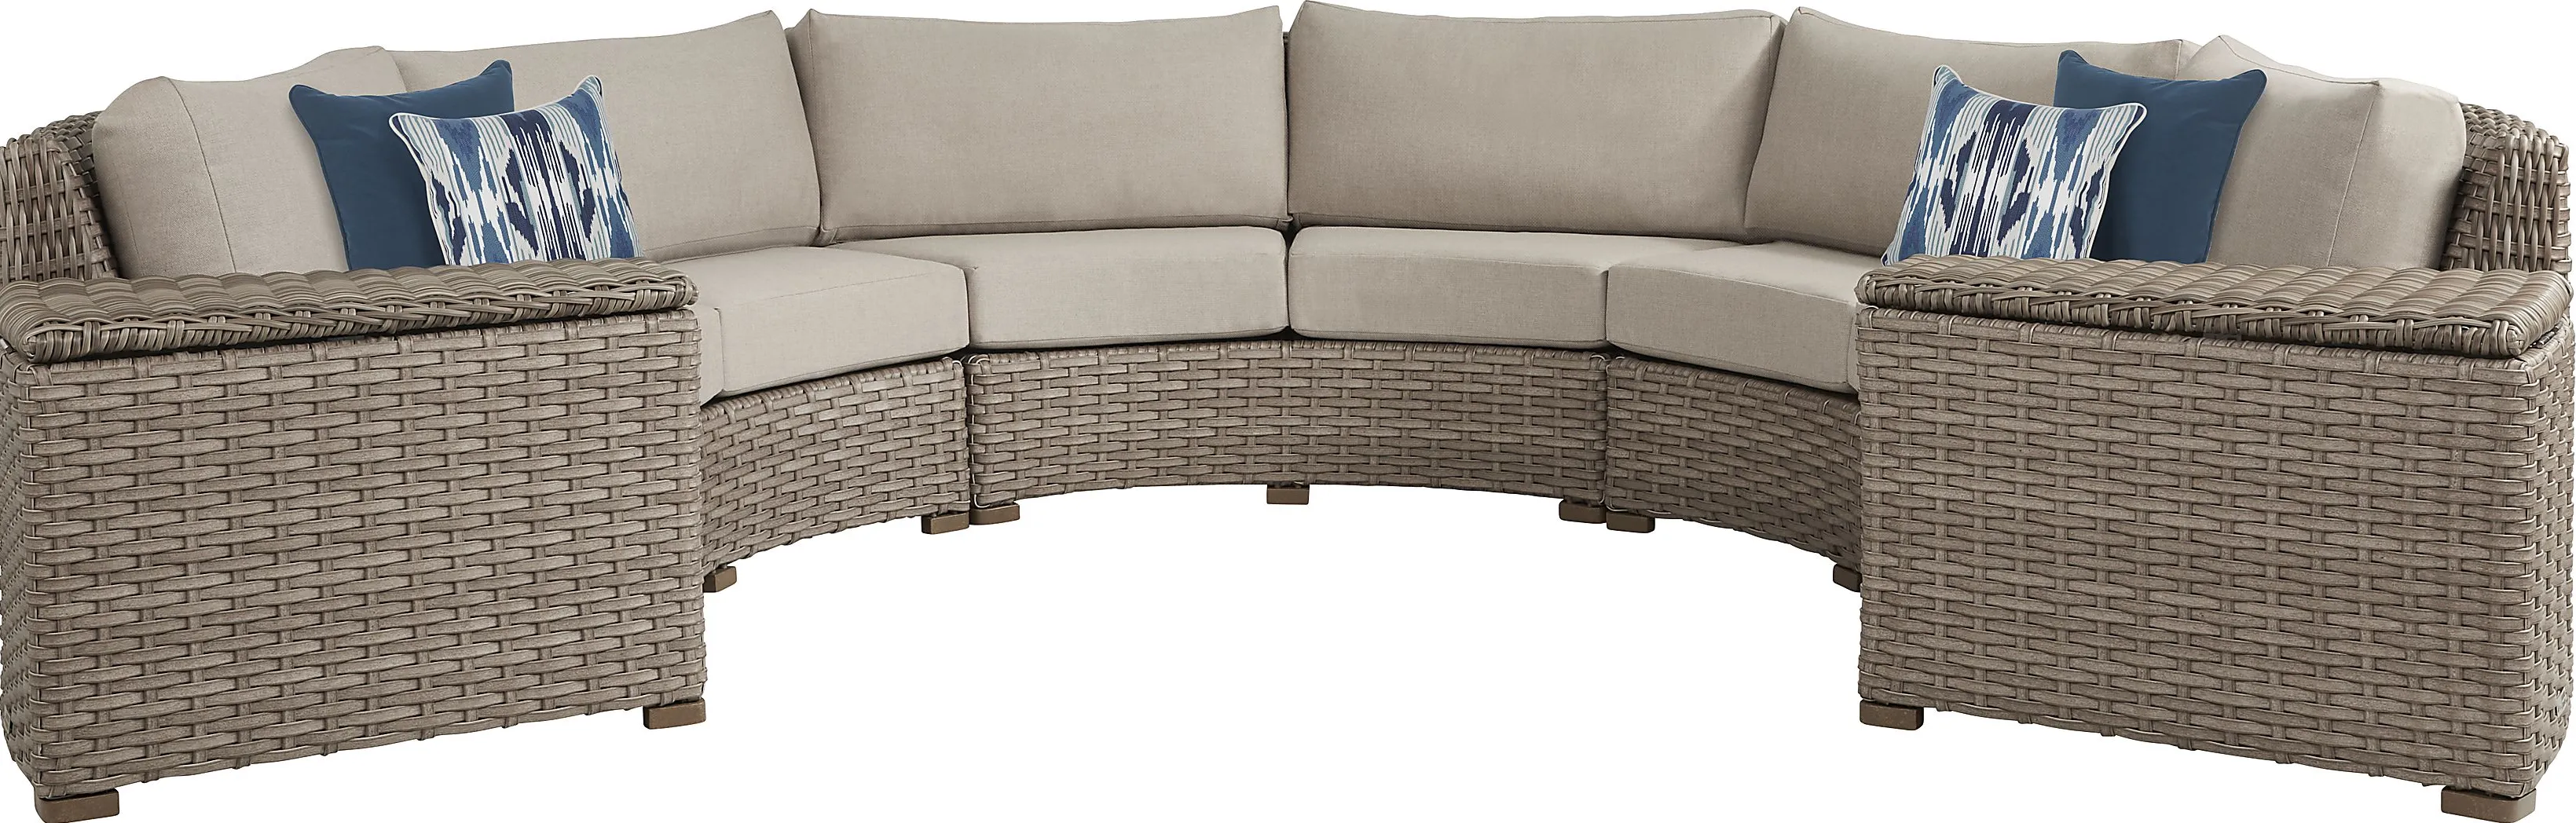 Siesta Key Driftwood 5 Pc Outdoor Curved Sectional with Sand Cushions